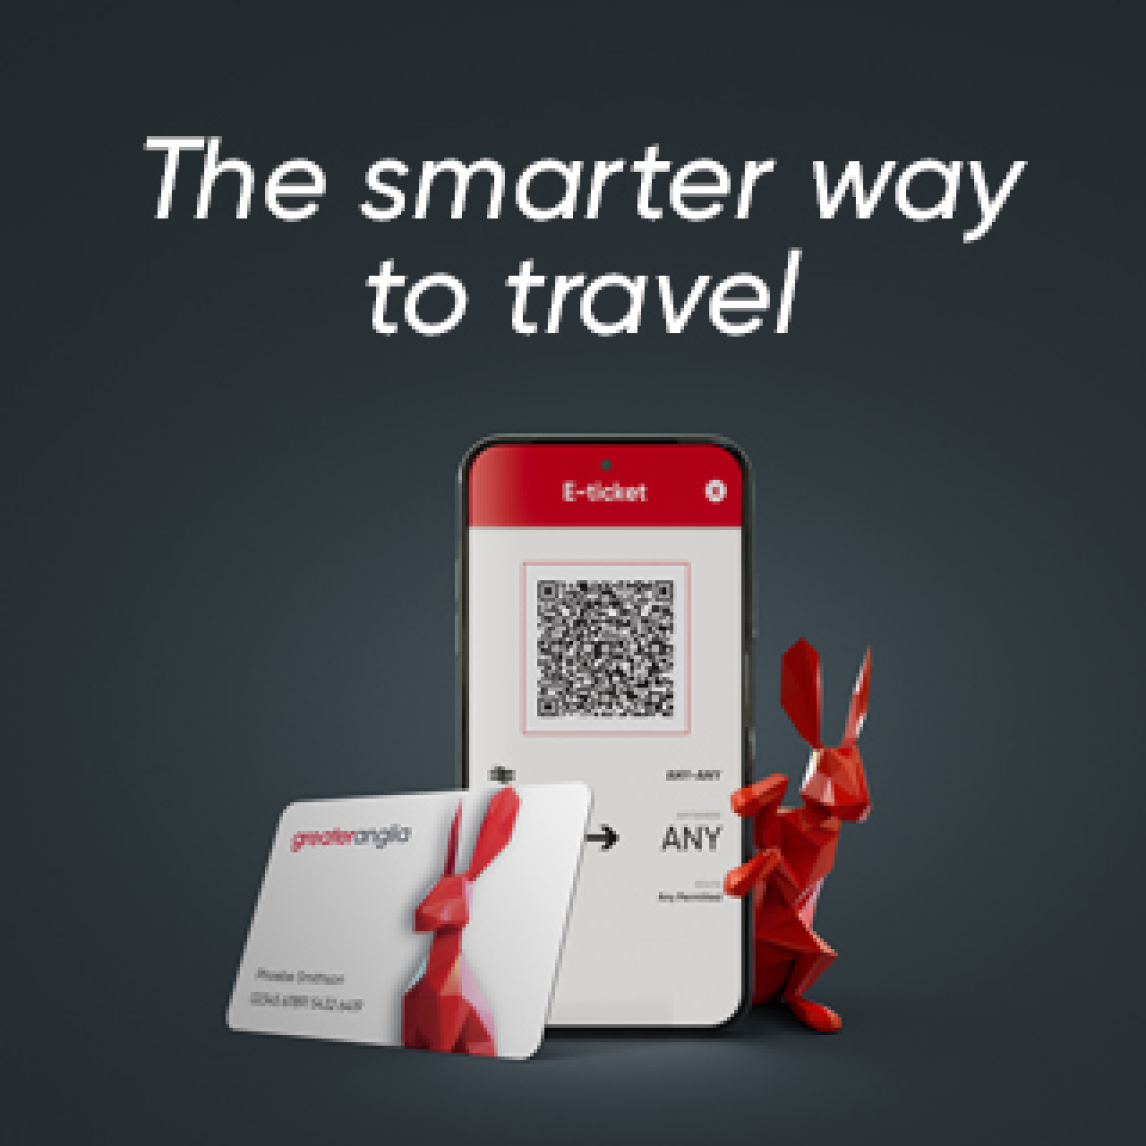 the smarter way to travel. Greater Anglia smartcard and e-ticket.